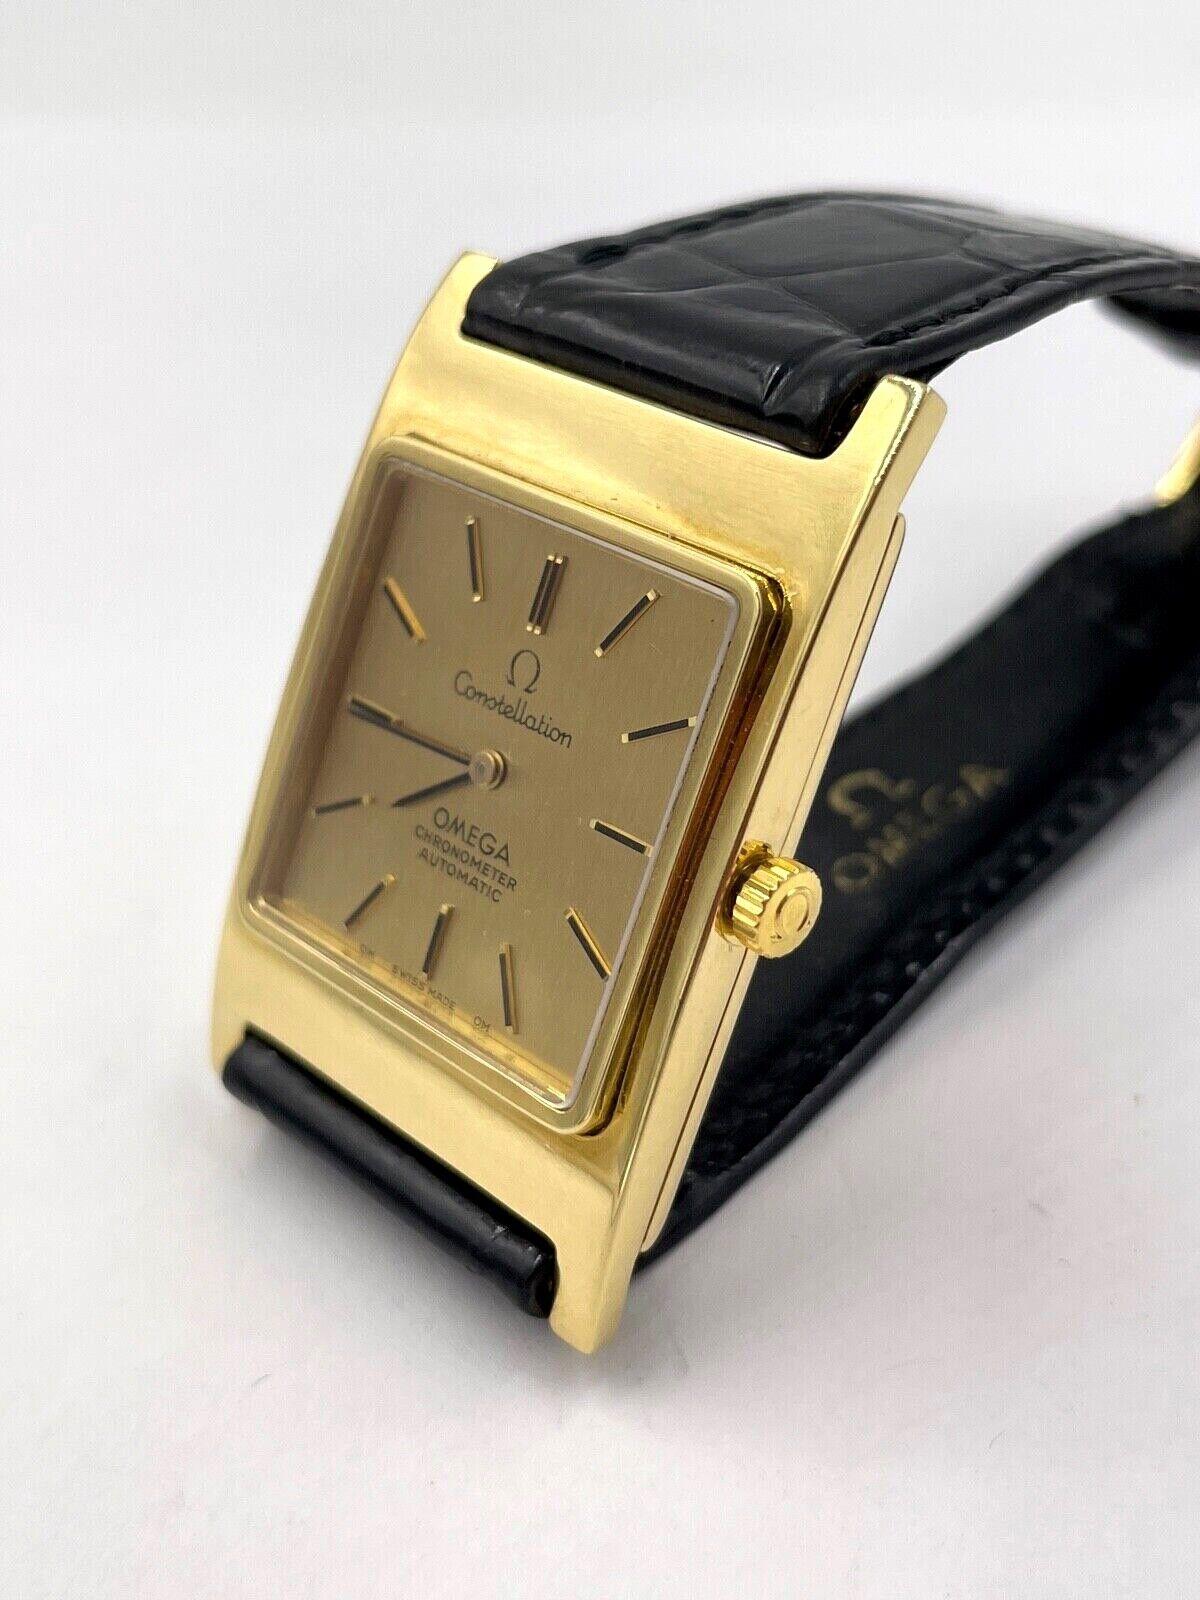 Omega Constellation 18k Yellow Gold Automatic Wristwatch on Omega Black Leather Strap, Circa 1970. 

This vintage Omega Constellation chronometer automatic XL case is in solid 18k yellow gold. This is a great looking watch, very hard to find in this